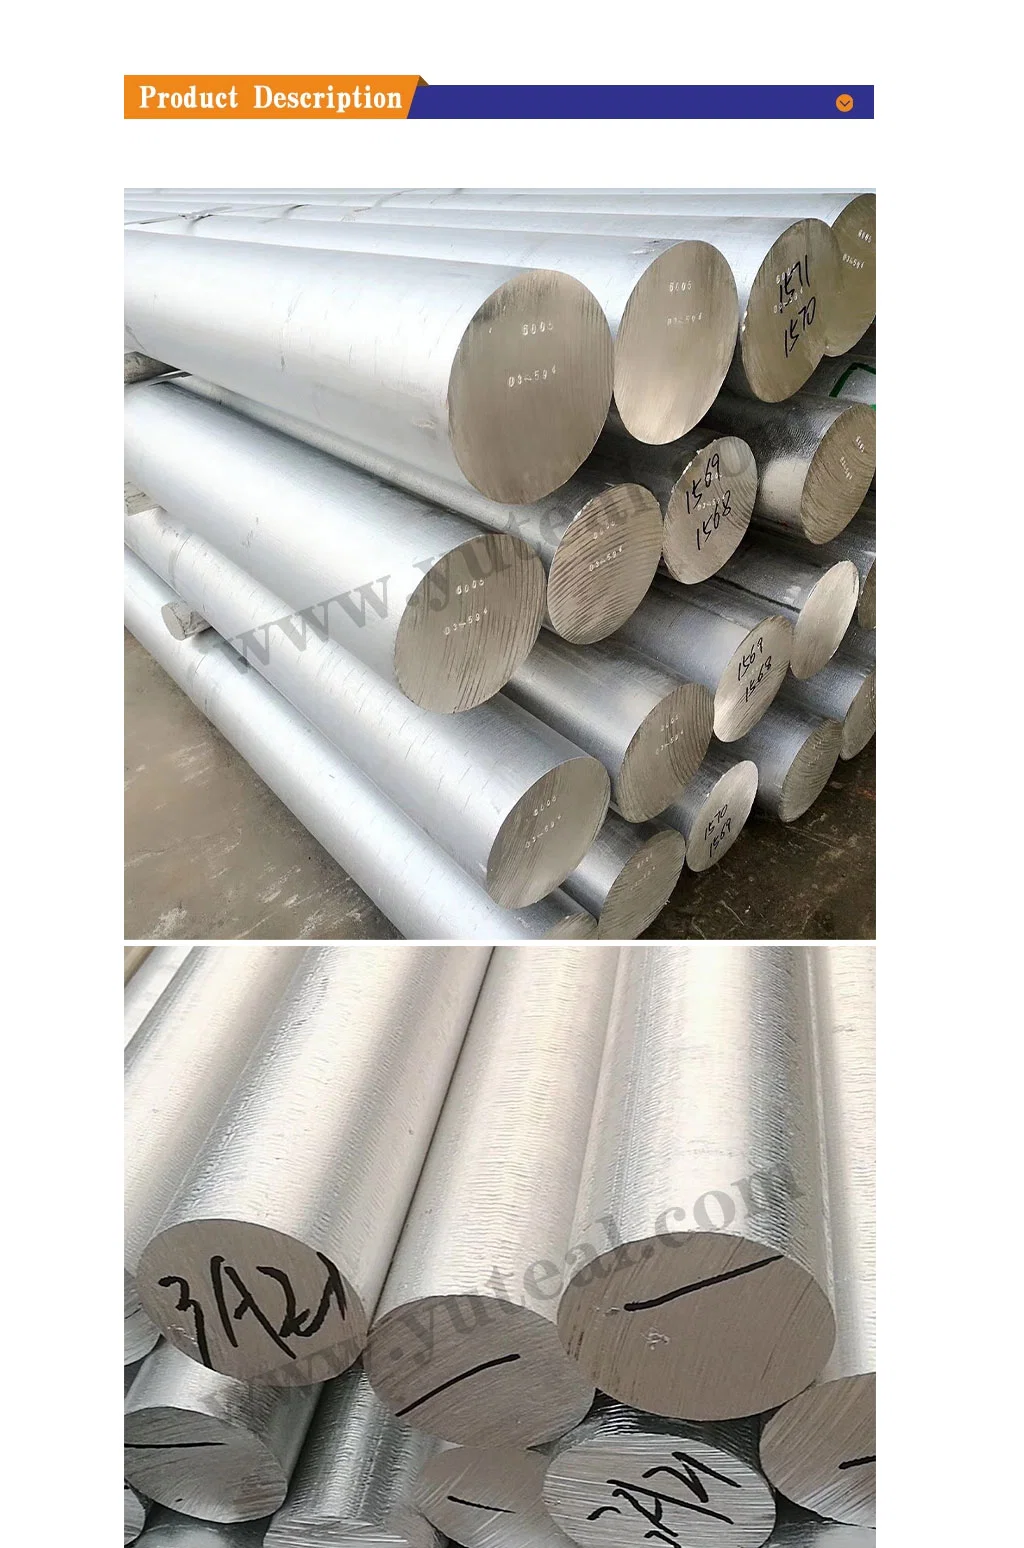 Customized High Quality 5052 5454 5056 5082 5182 5132 Aluminum Round Bar 8mm 12mm 15mm 20mm 25mm 50mm